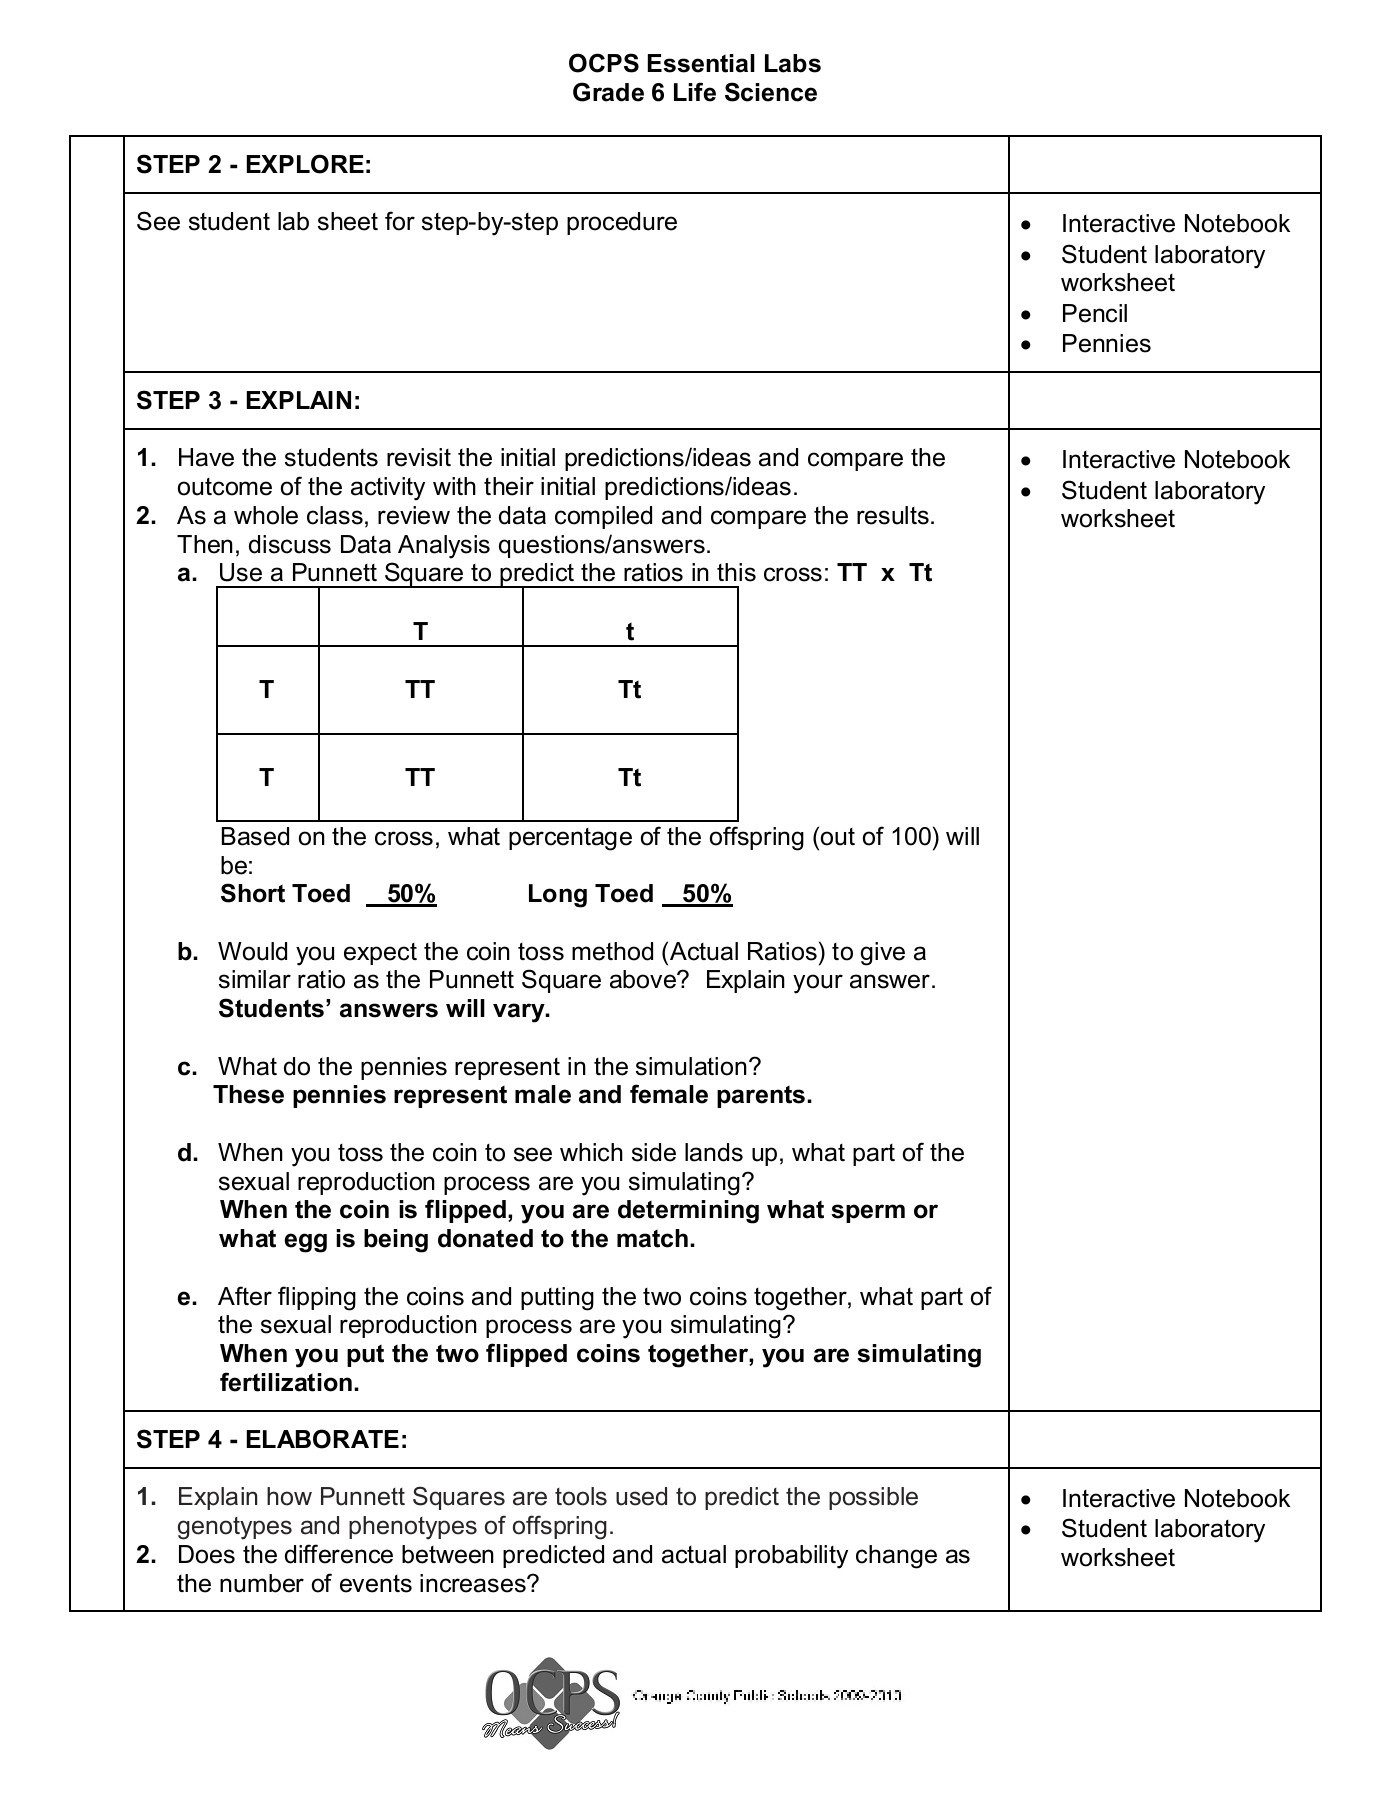 Genetics Worksheet Answer Key Grade 6 Life Science Penny Genetics What are the Chances